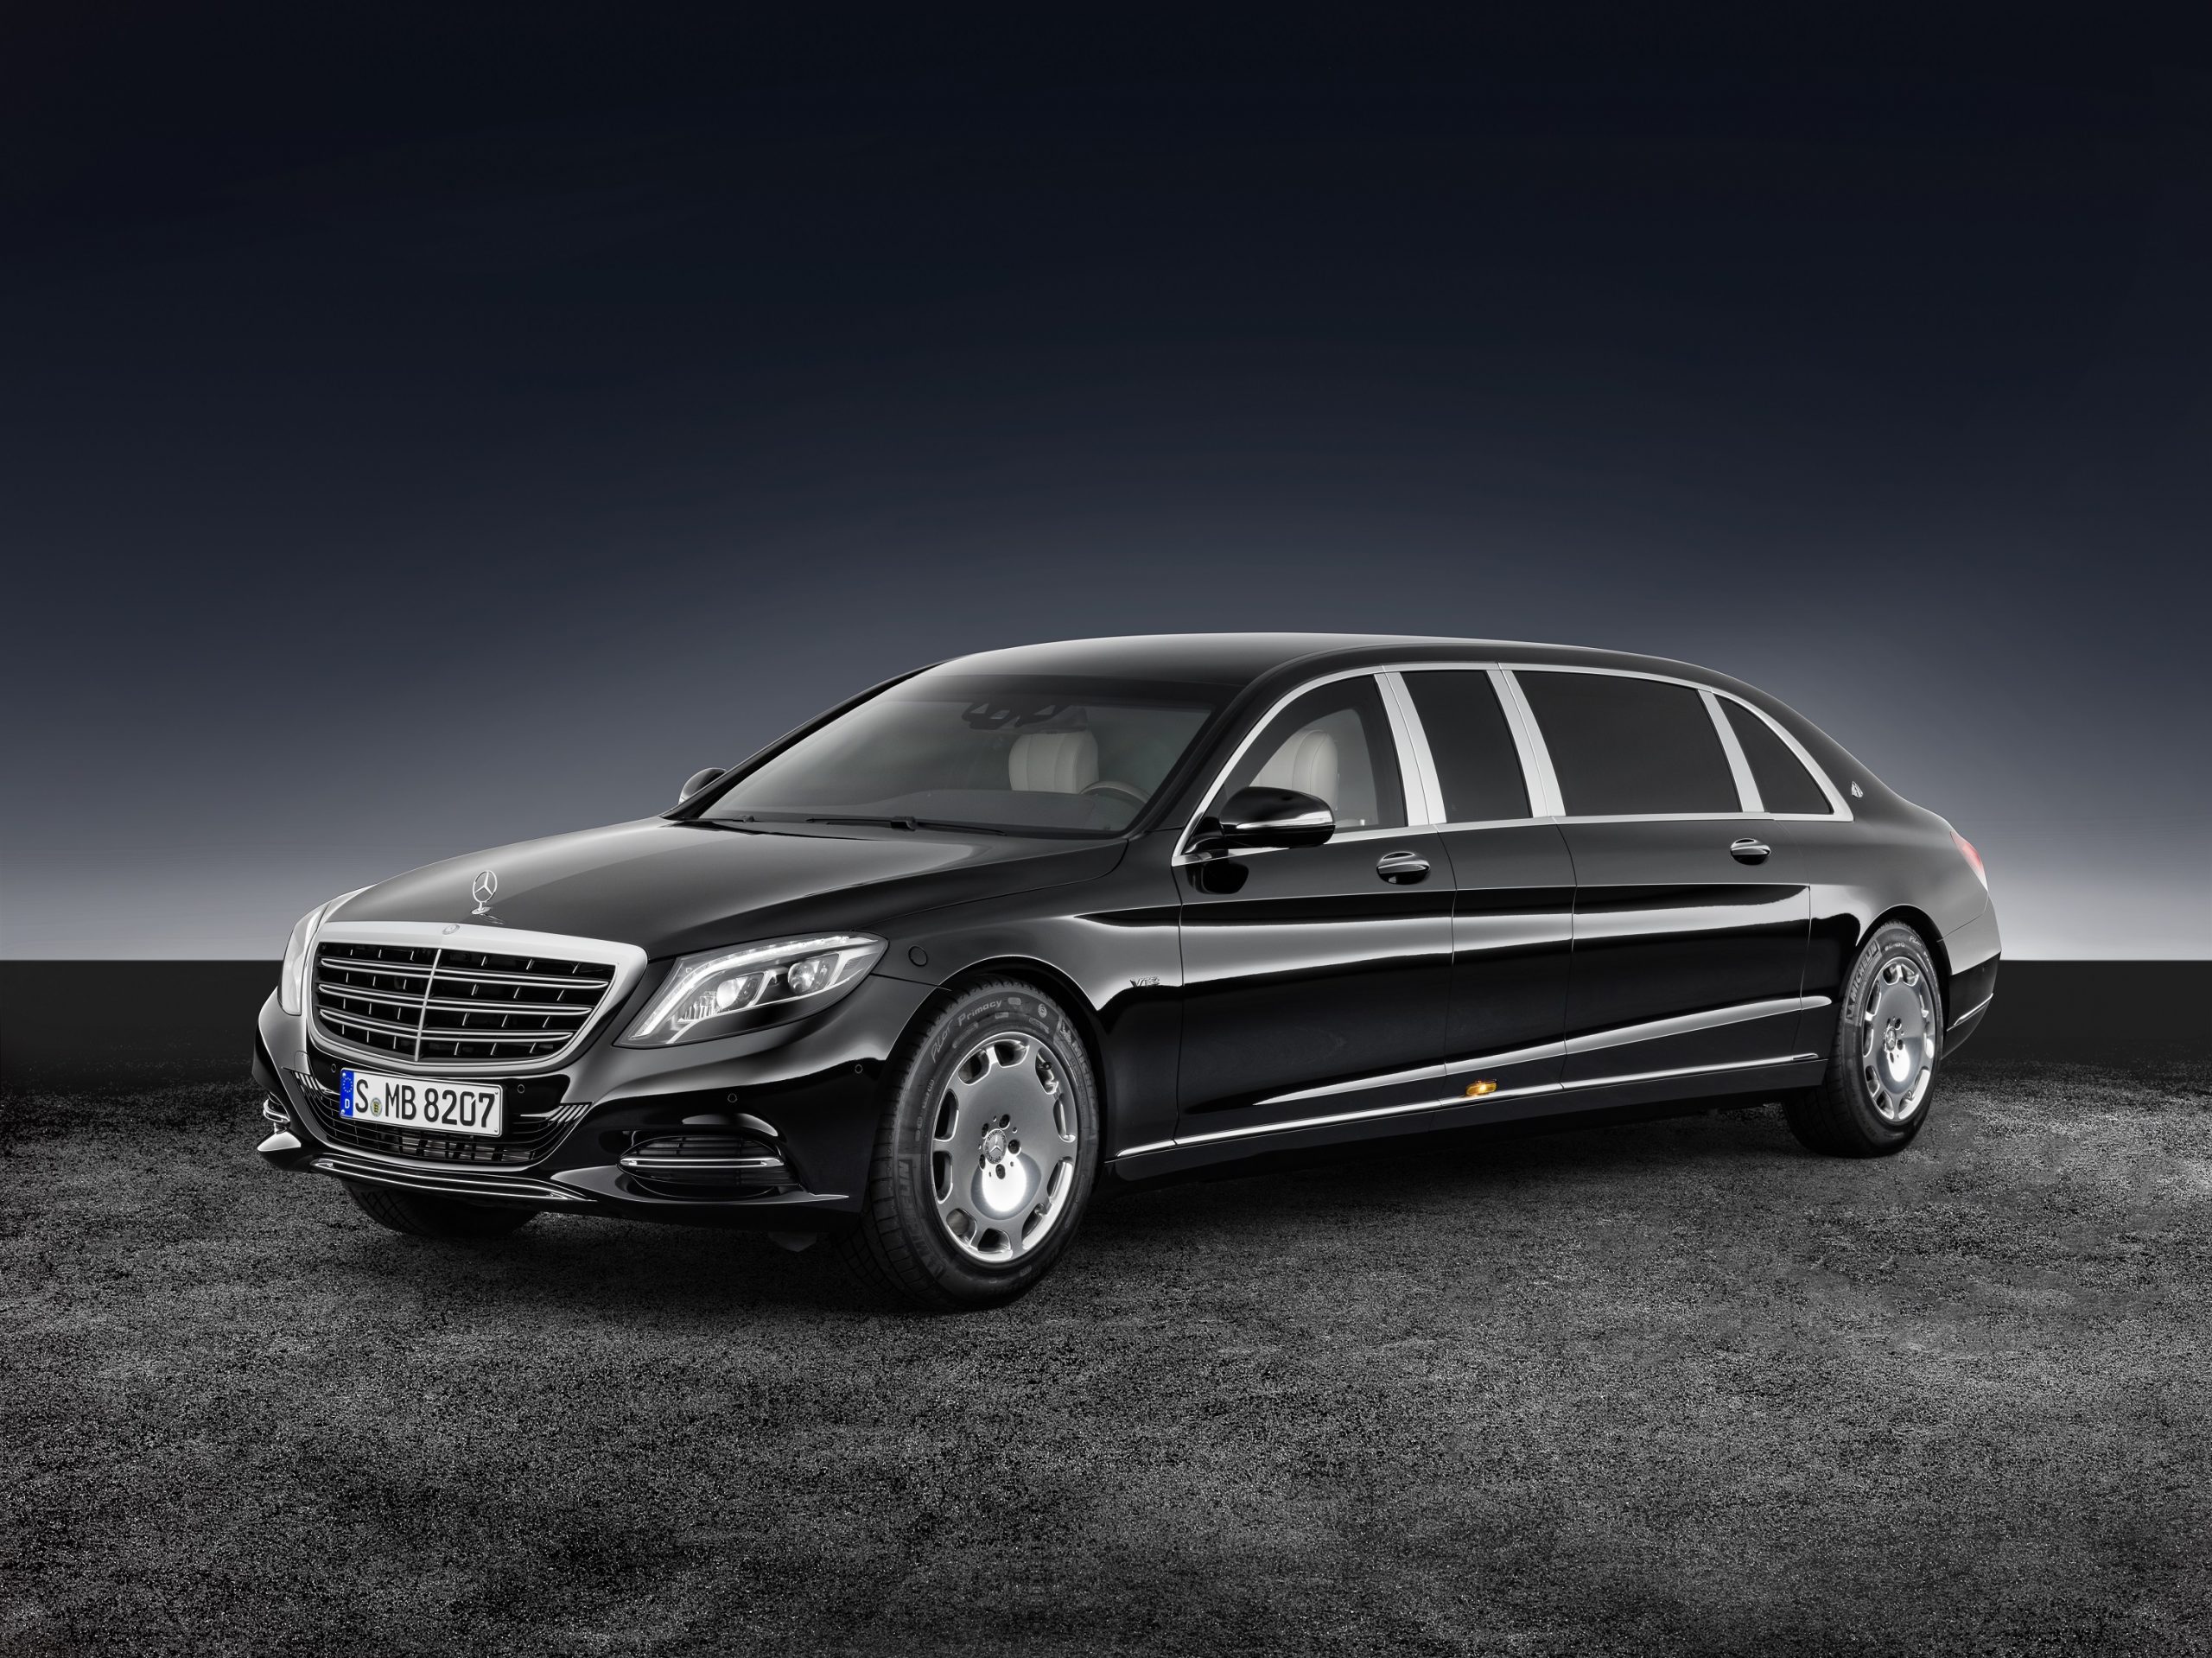 A black Mercedes-Benz S 600 armored limo shot from the front 3/4